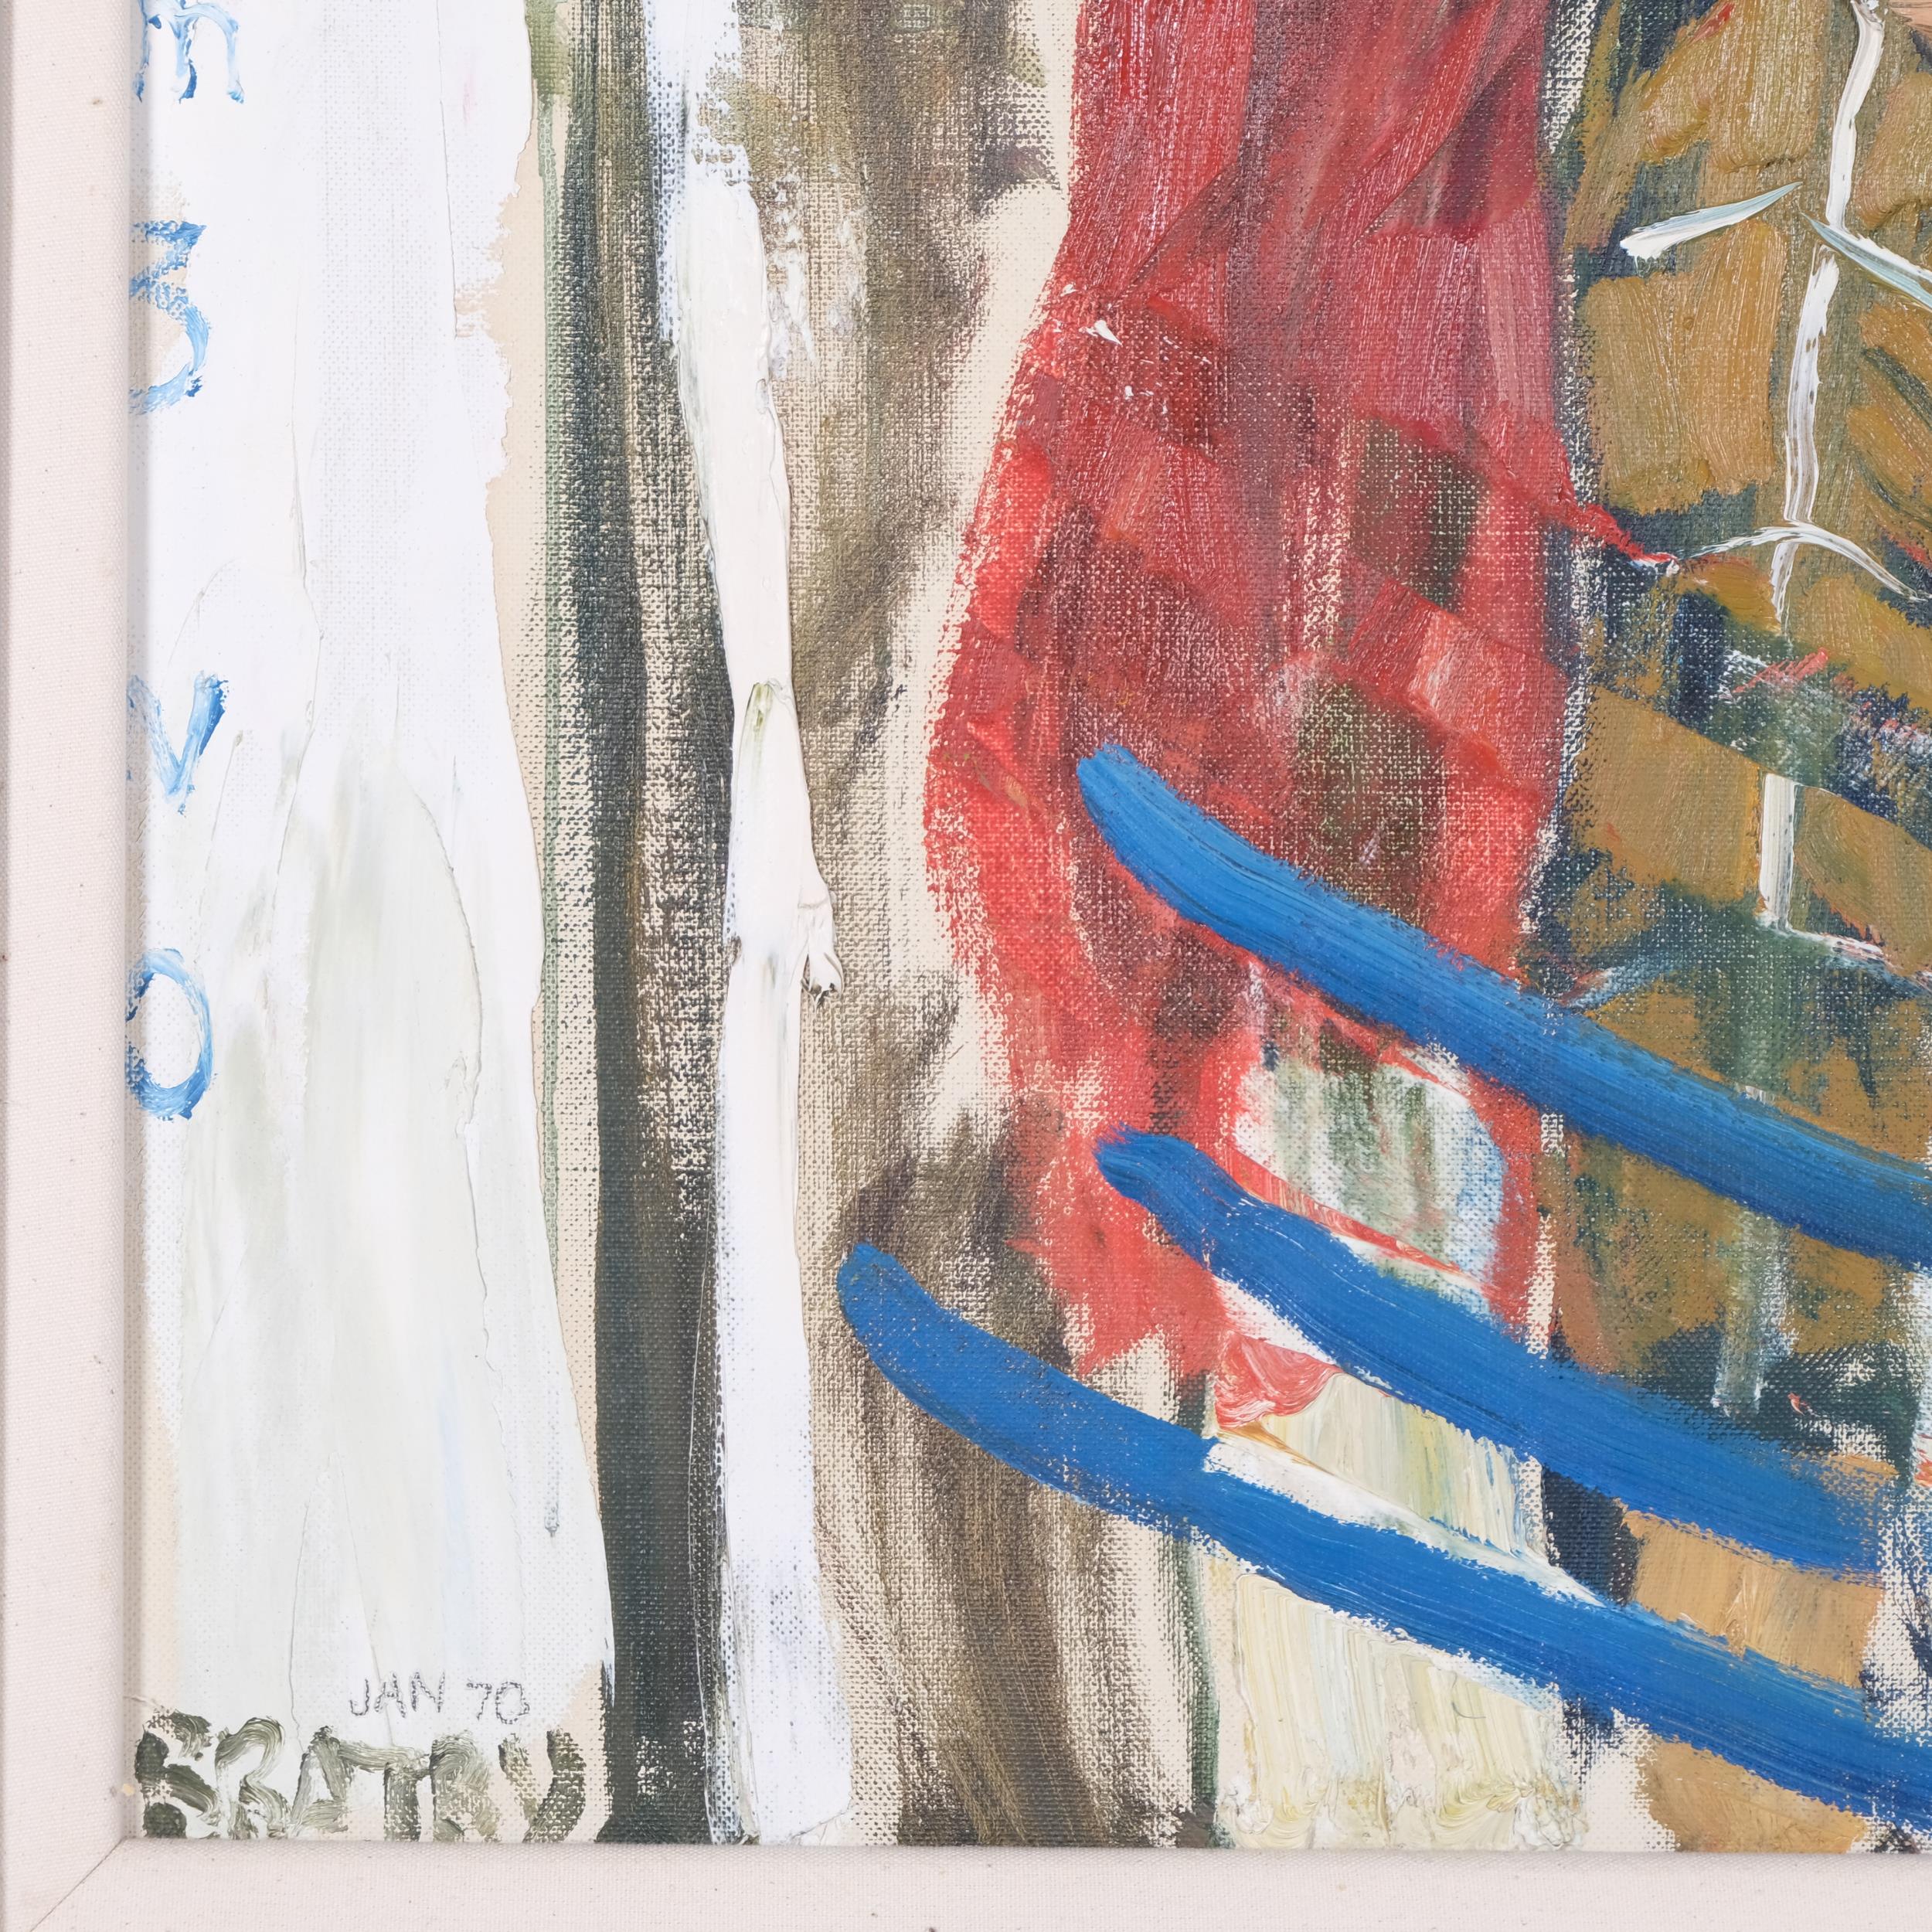 John Bratby (1928 - 1992), self portrait with the artist's son, signed and dated 1970, 122cm x 89cm, - Image 3 of 4